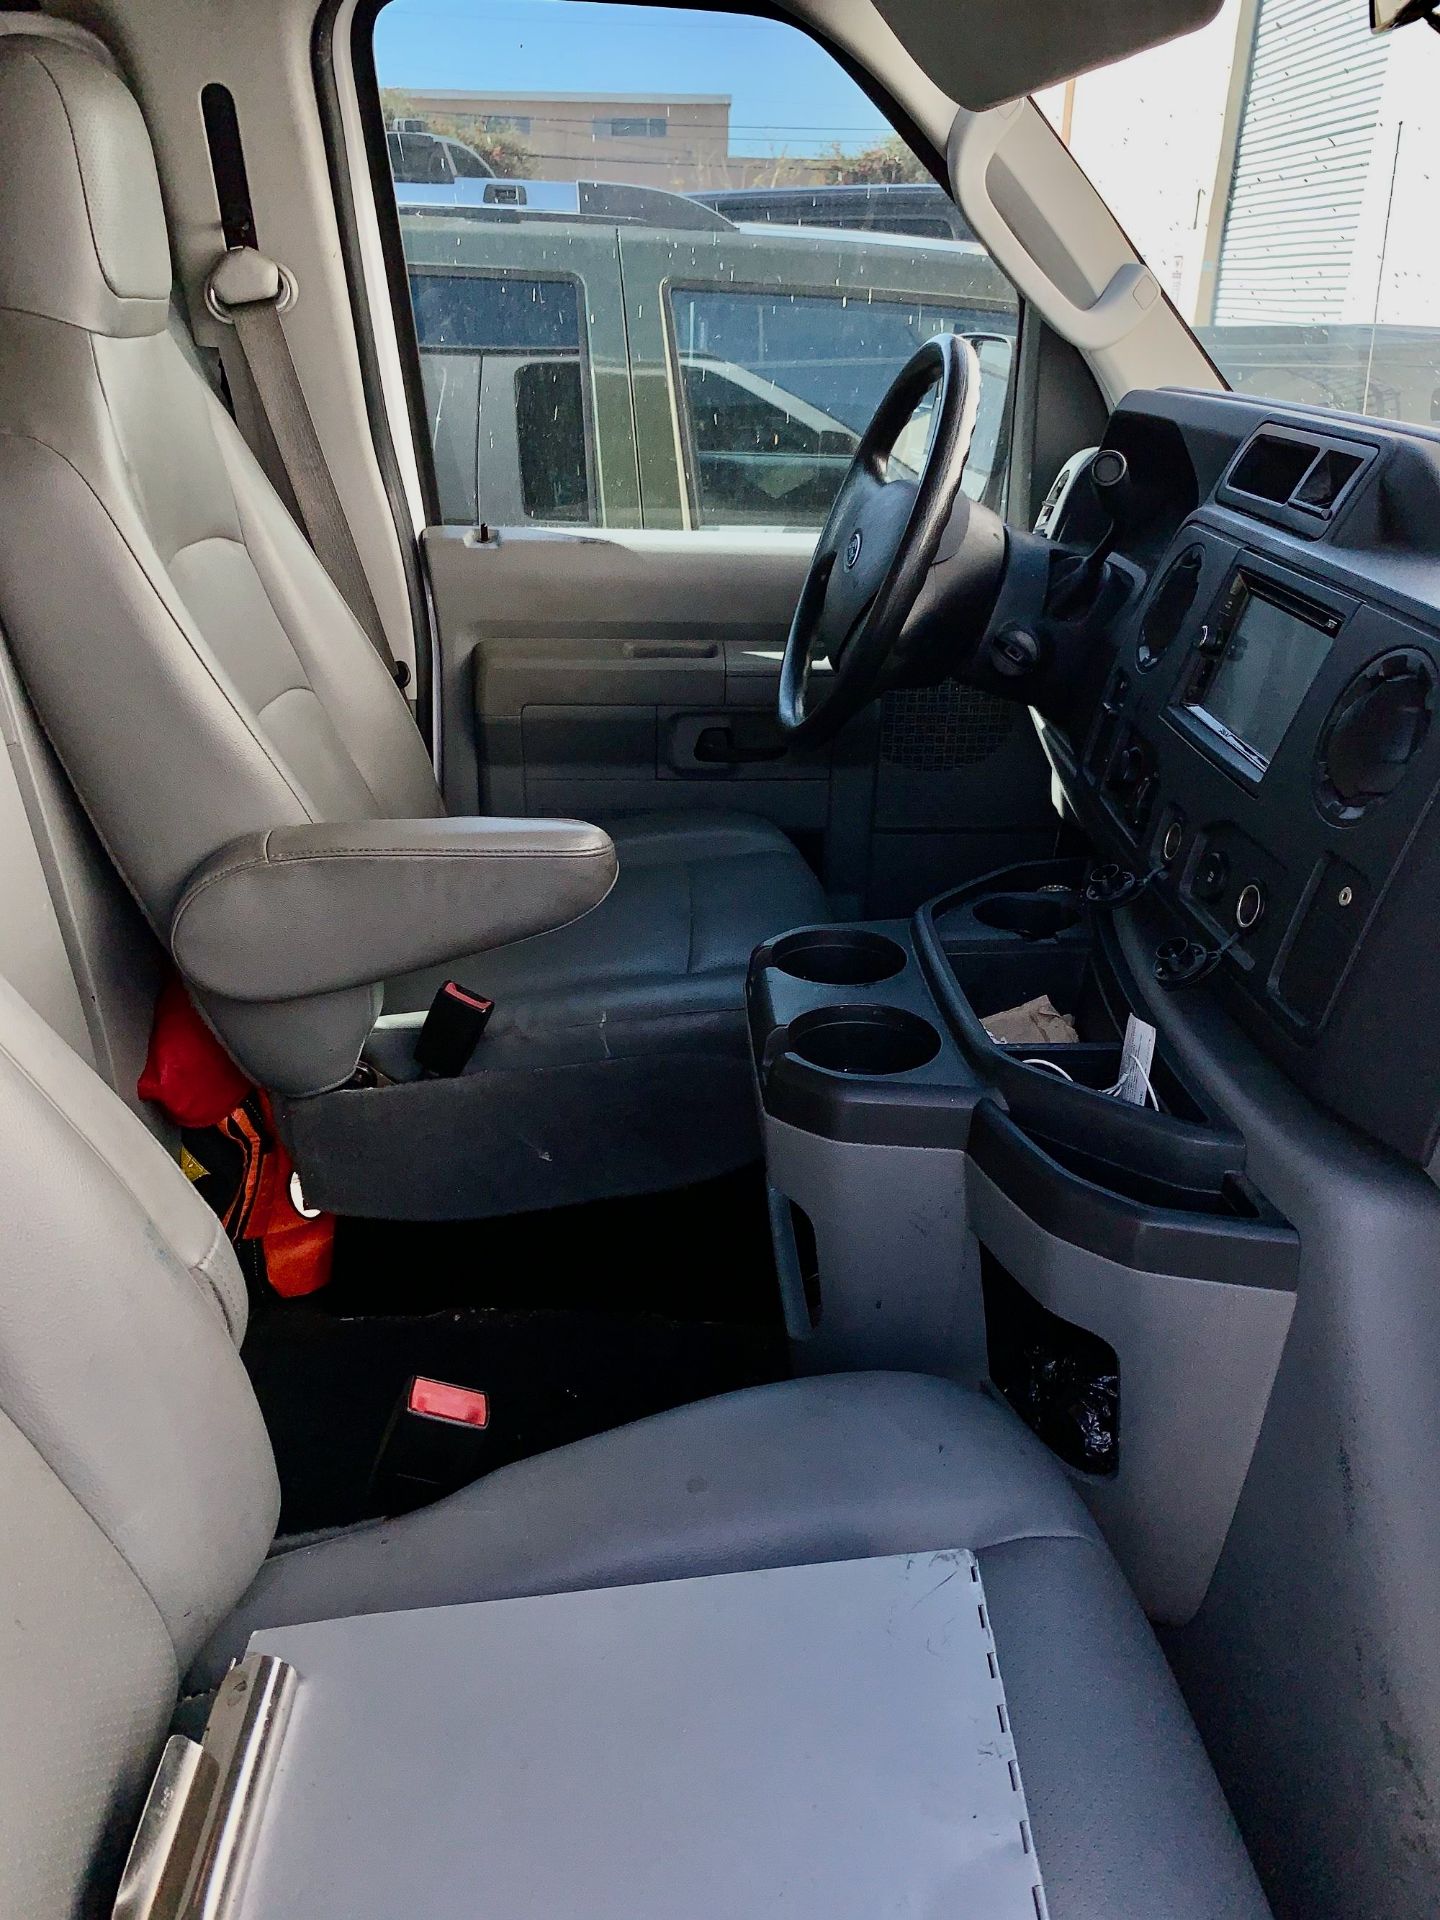 2014 Ford E-150 Delivery Van, 69,327 Miles, VIN: 1FTNE1 | Rig Fee: Buyer to Remove or Contact Rigger - Image 11 of 15